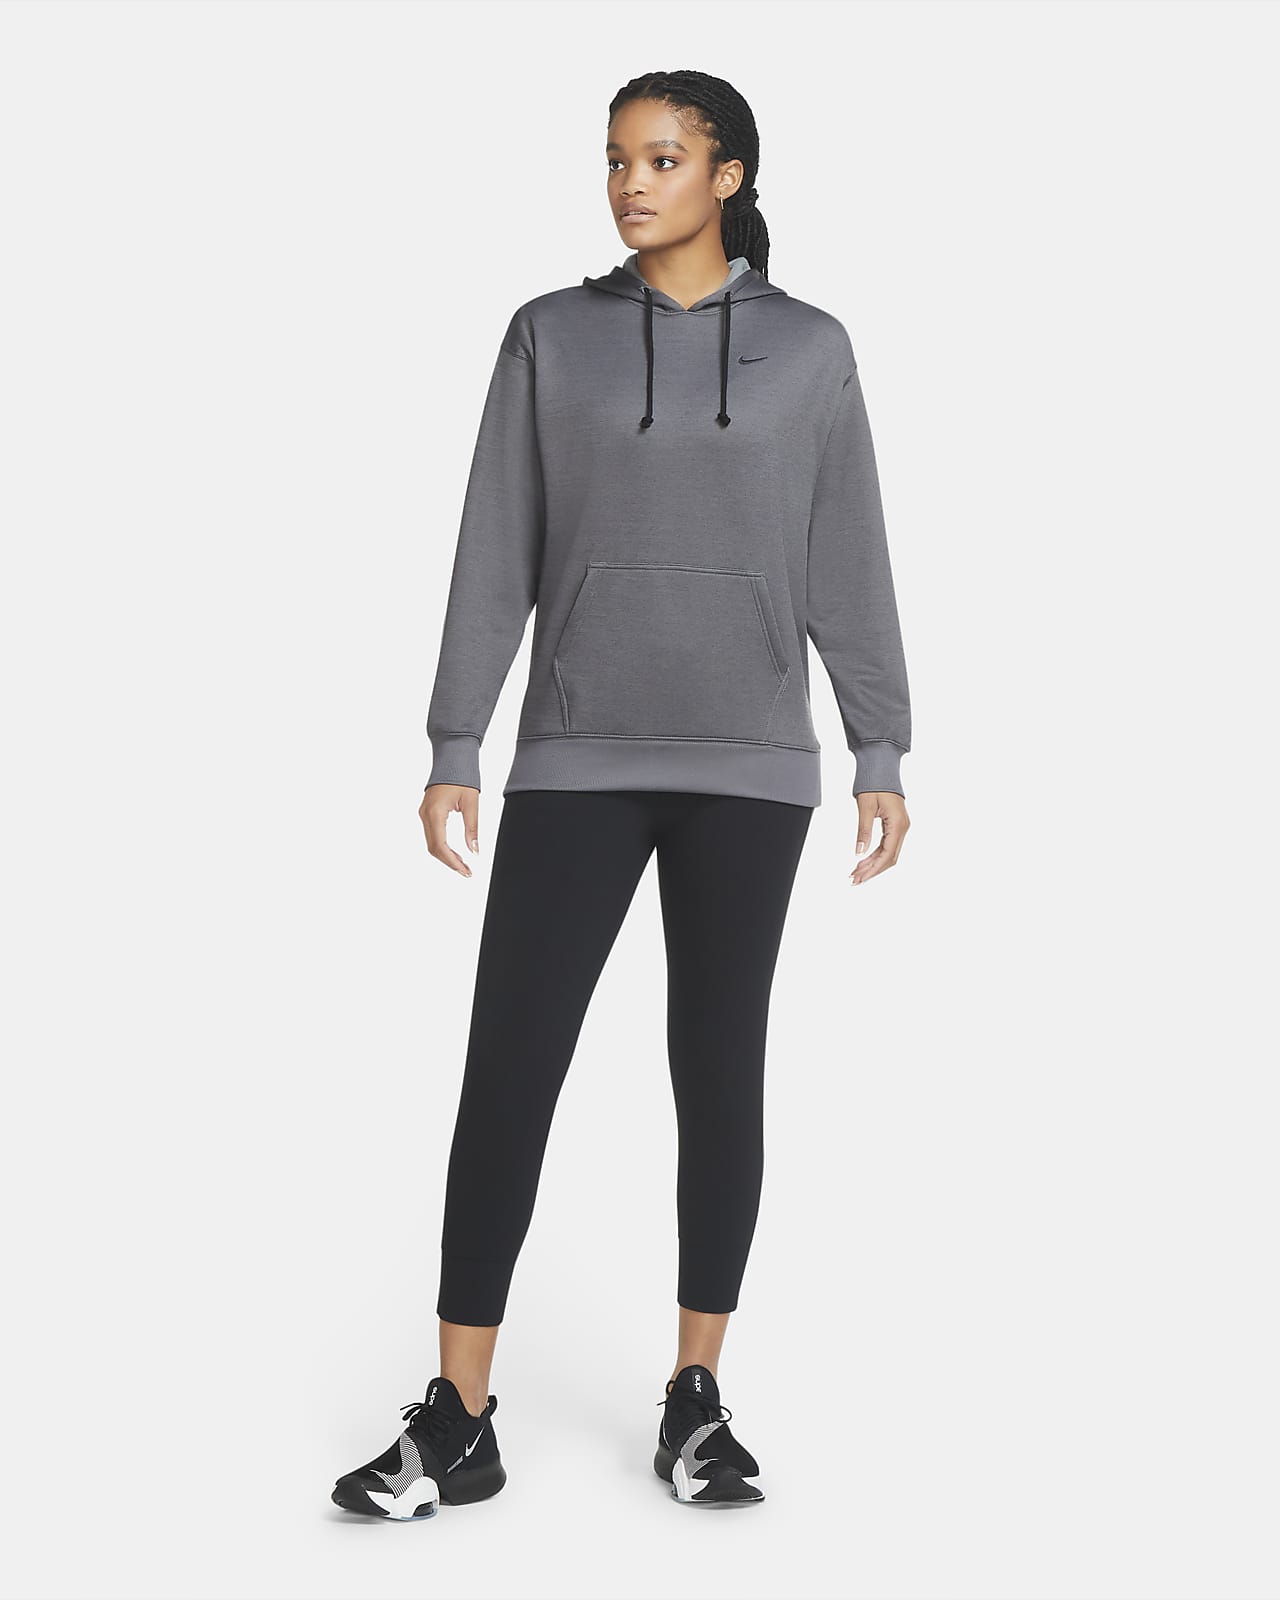 nike therma fit jacket womens